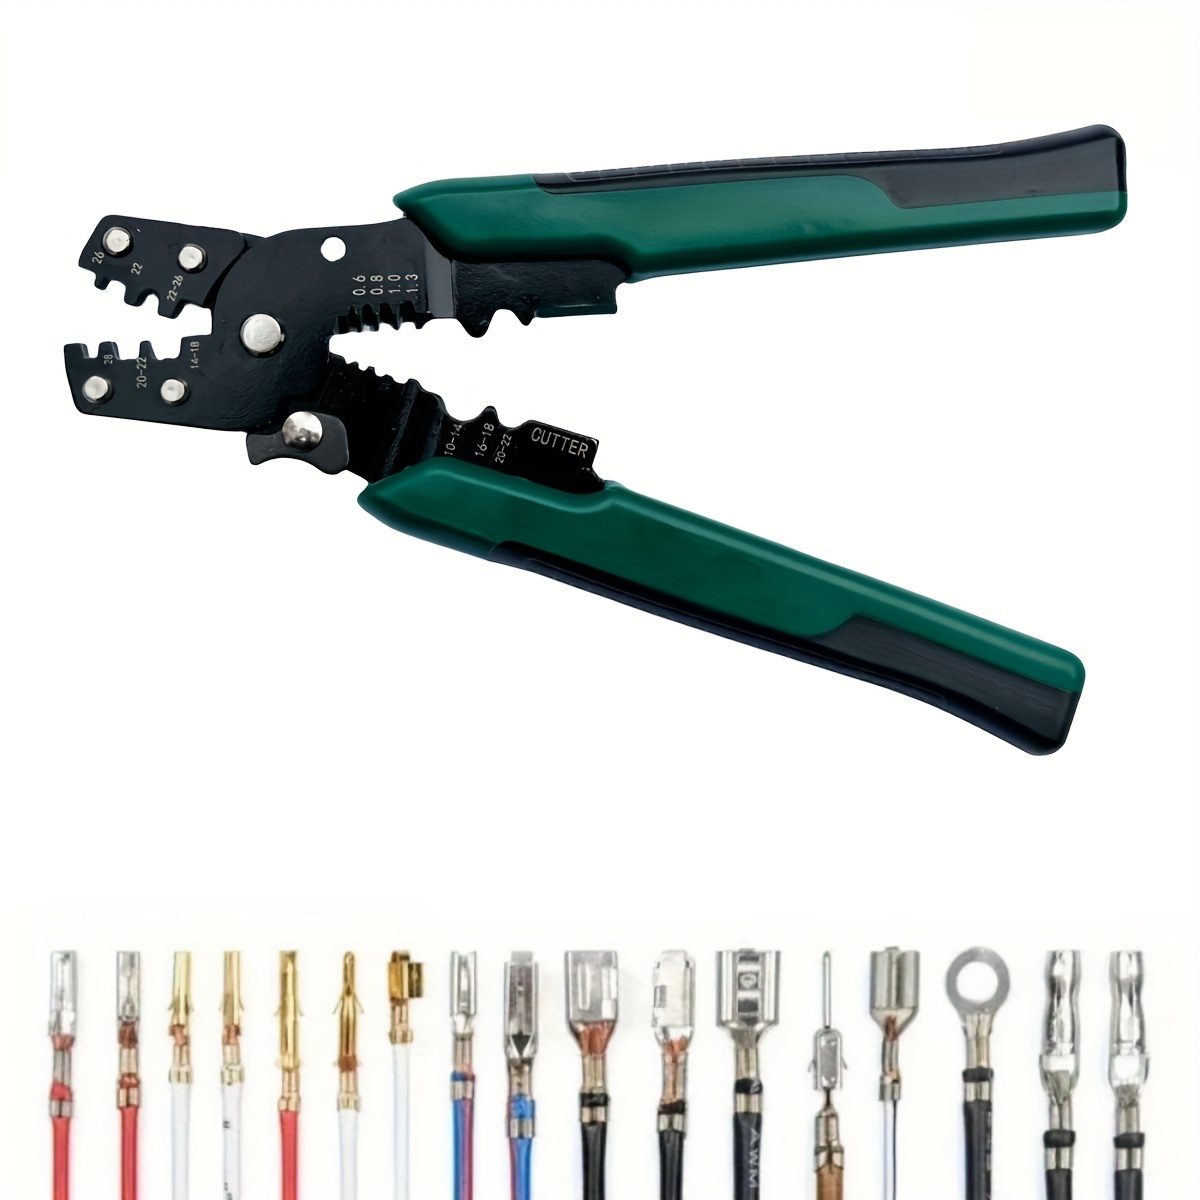 

1pc Wire Stripping Pliers, Chrome Vanadium Steel Multi-functional Hand Crimping Tool, Wire Cutter, Durable Wire Stripper